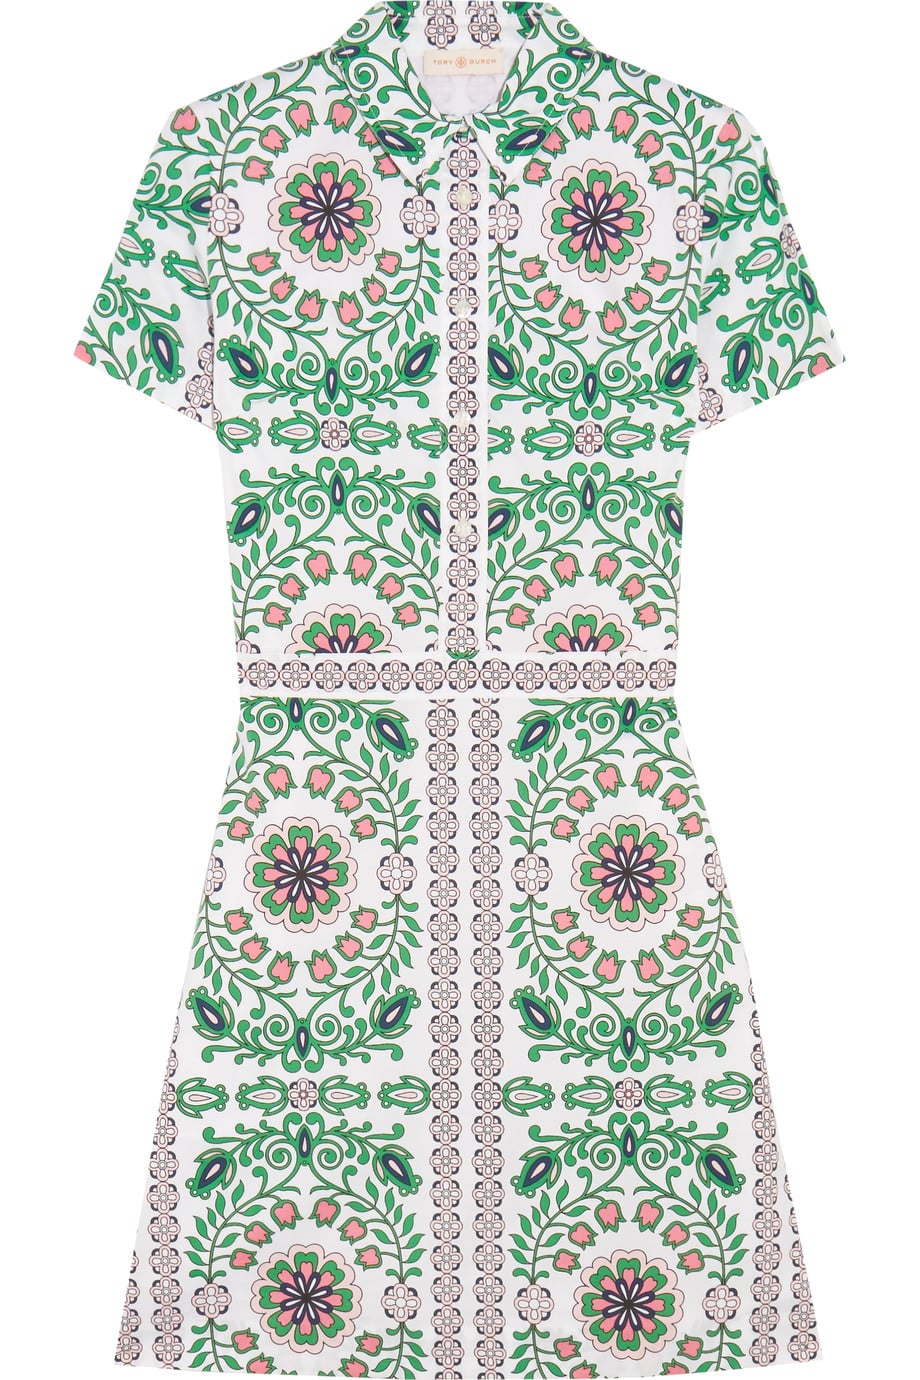 Tory Burch Port Printed Cotton-Blend Mini Dress ($245, originally | This Is  the Kate Middleton Outfit to Wear Based on Your Zodiac Sign | POPSUGAR  Fashion Photo 11